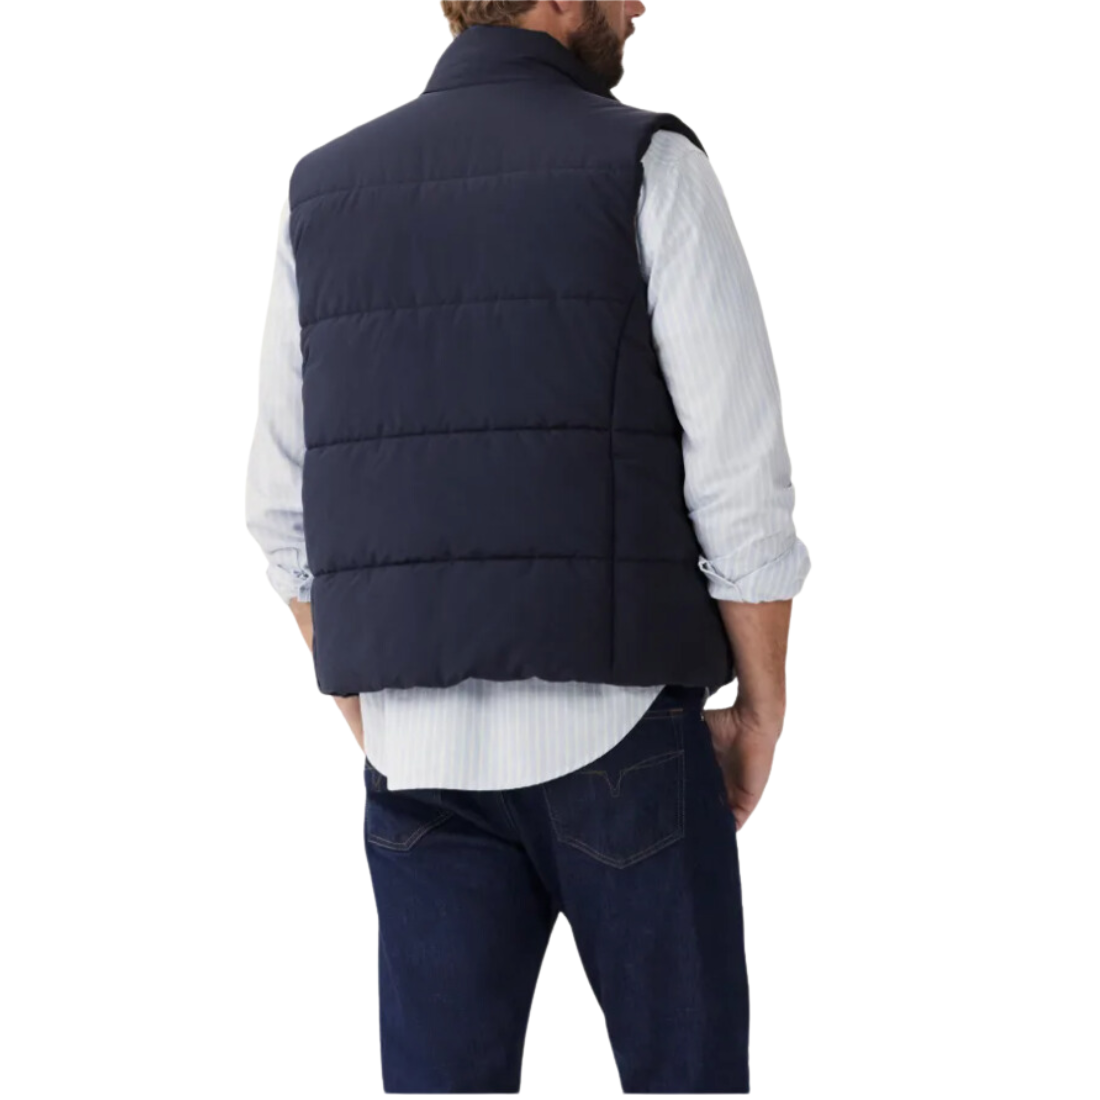 RM Williams Vest, Padstow in Navy. RM Williams Shop Adelaide